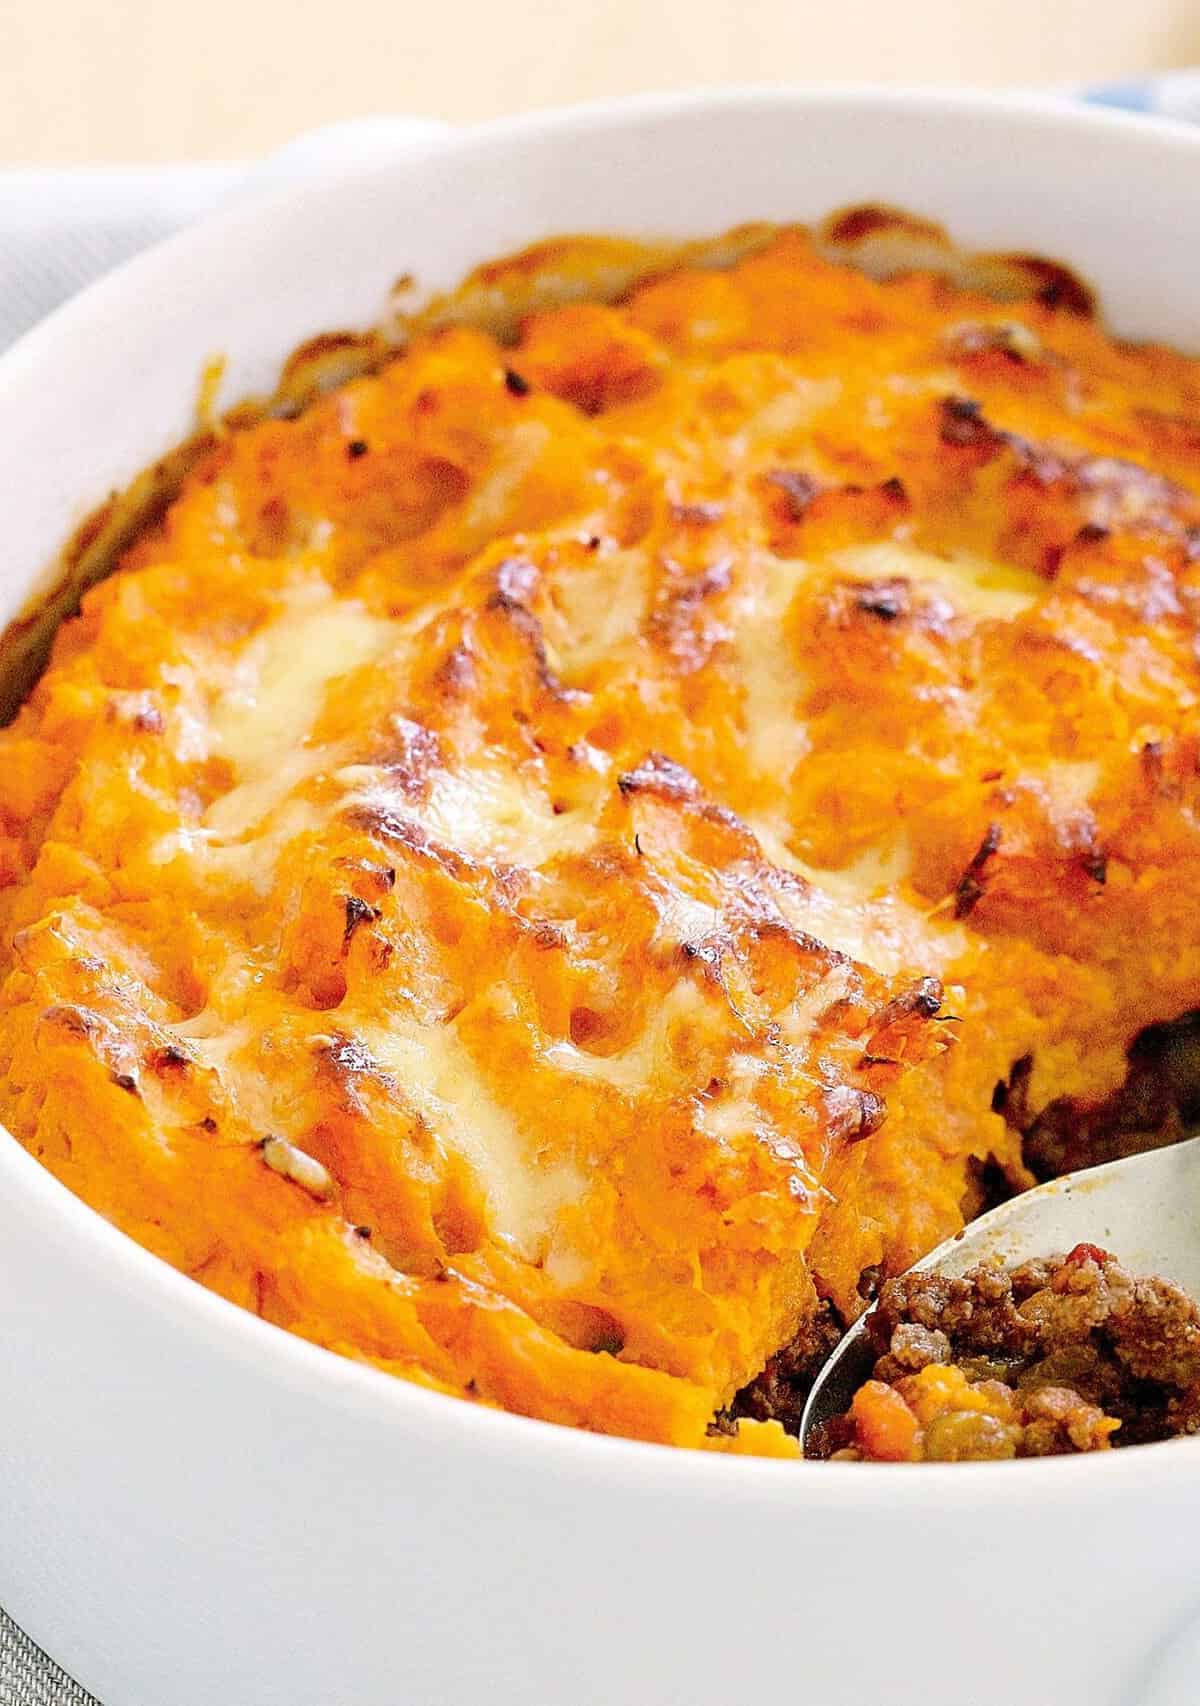  You'll never miss regular mashed potatoes once you try this sweet potato version.